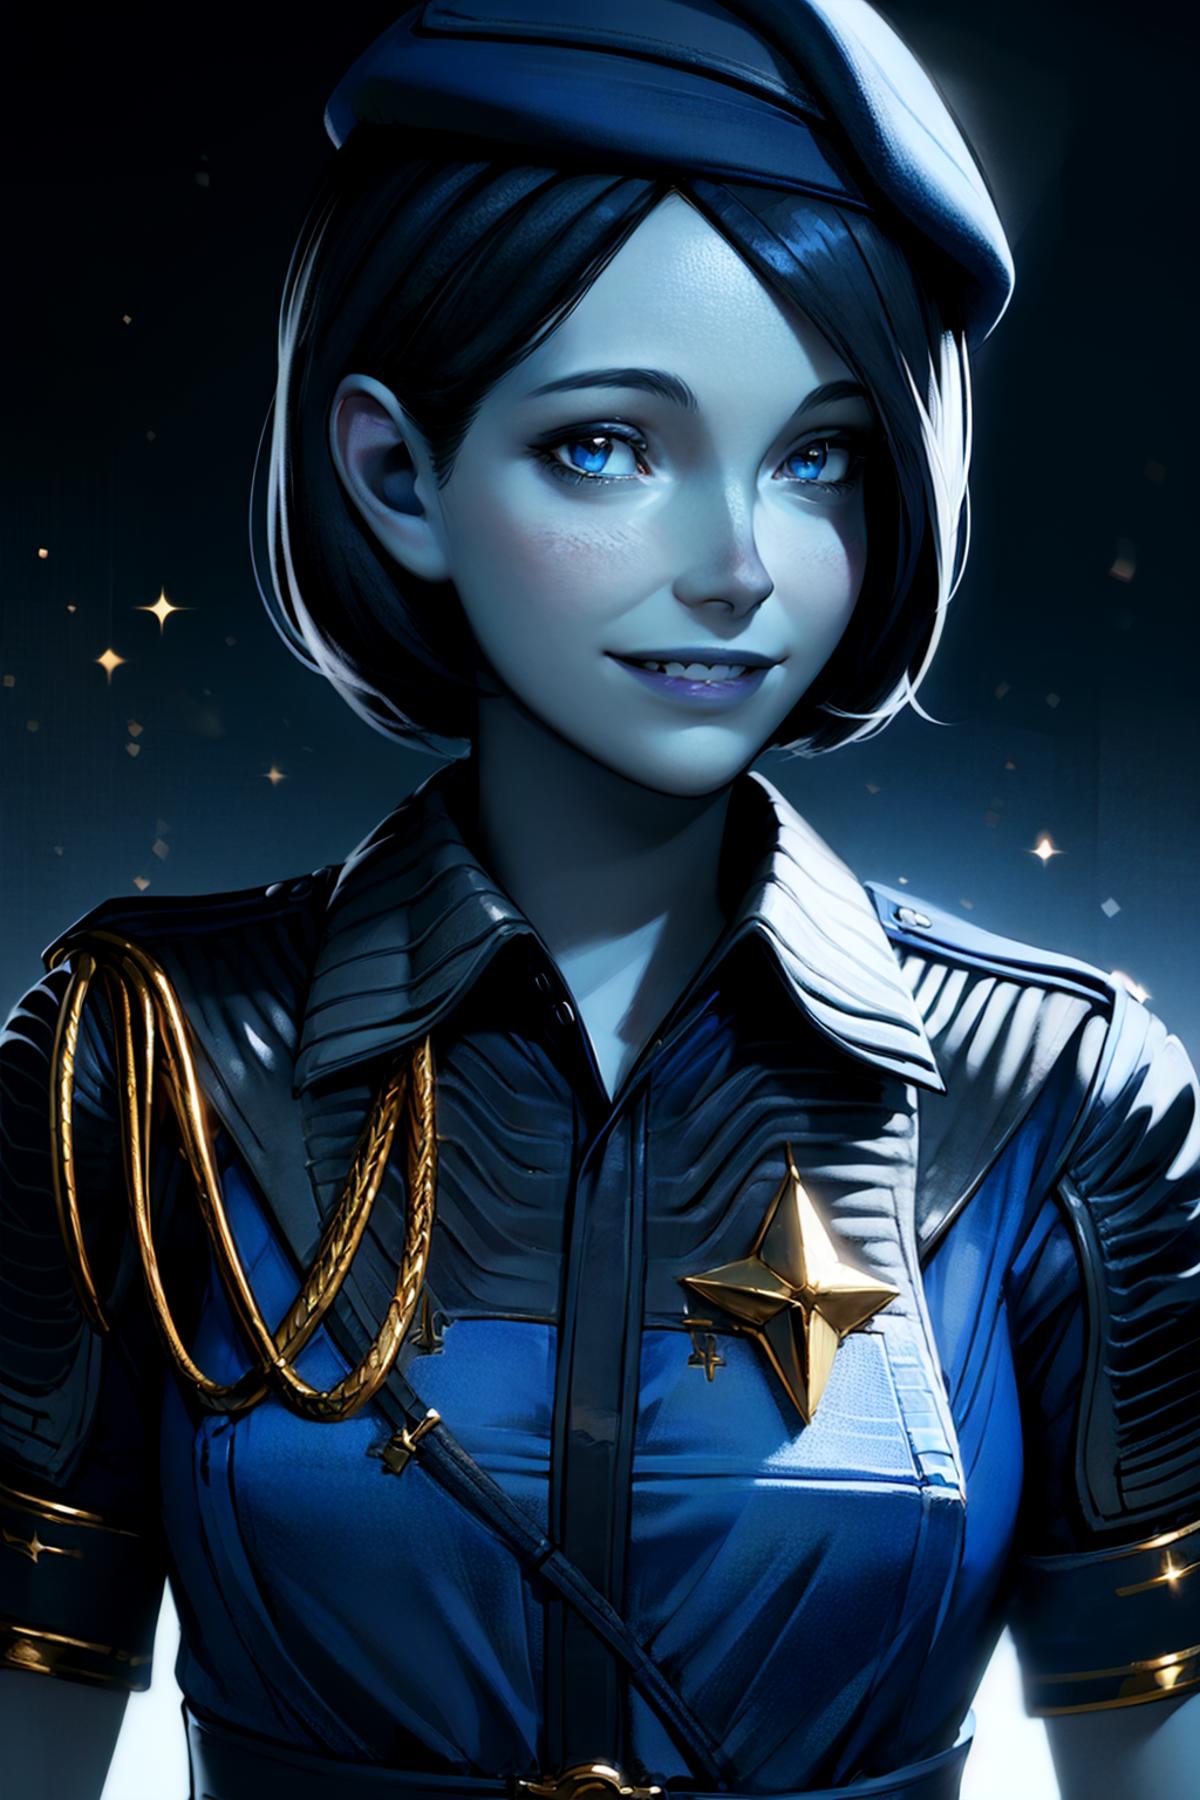 Nicholette (Nikki) Gold from Marvel's Guardians of the Galaxy (GOTG) Game image by InfernoKun